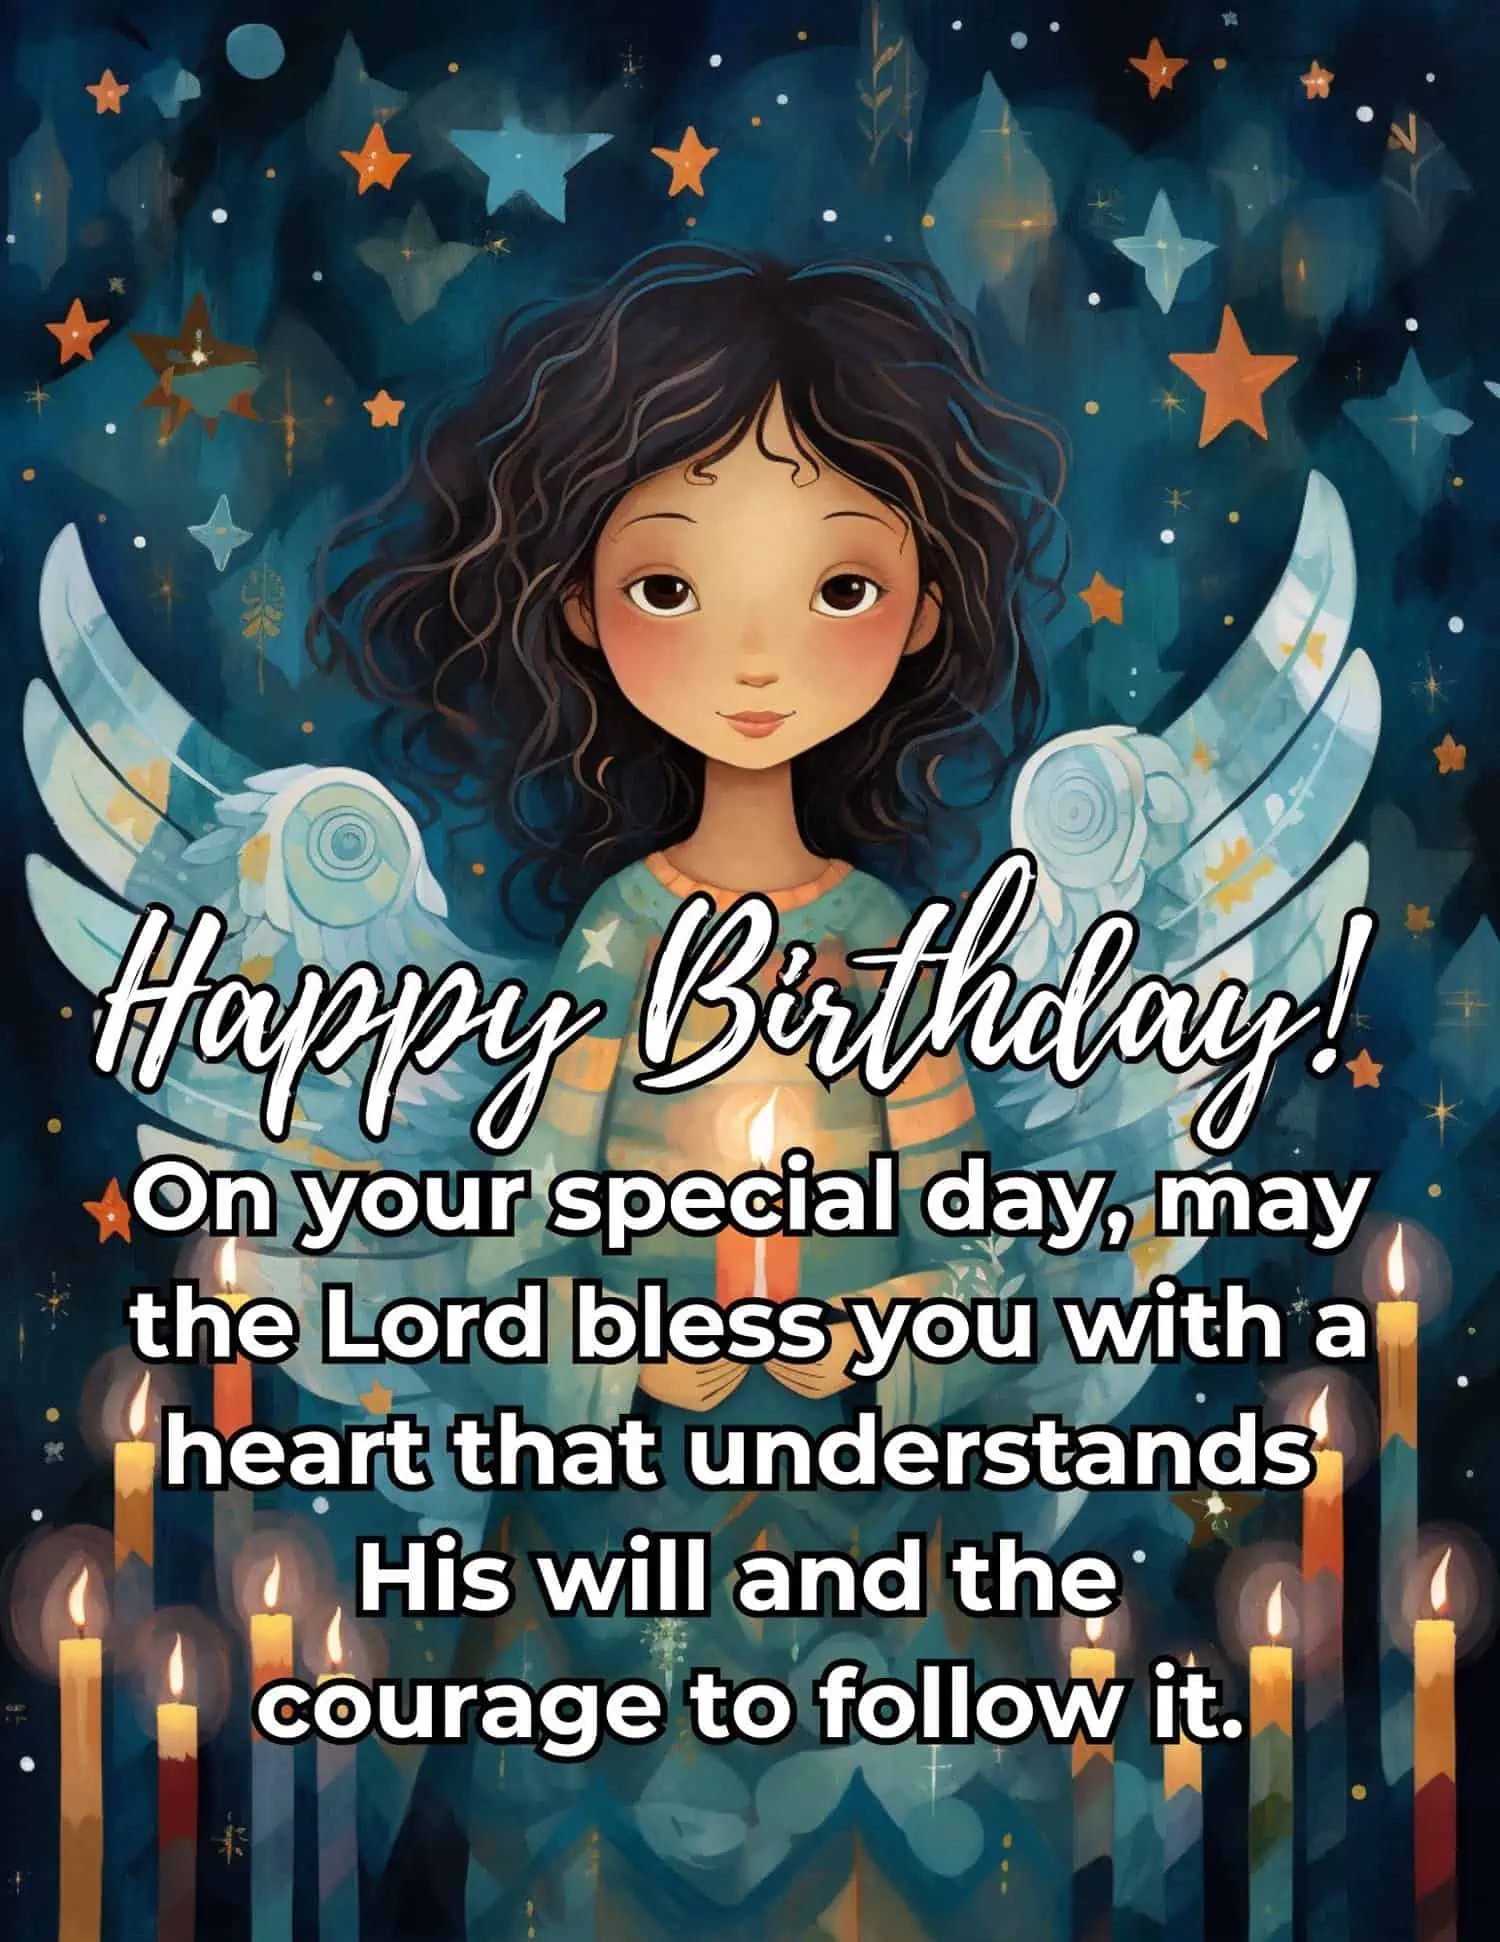 A collection of heartfelt and spiritually uplifting prophetic birthday prayers and blessings to inspire and guide on this special occasion.